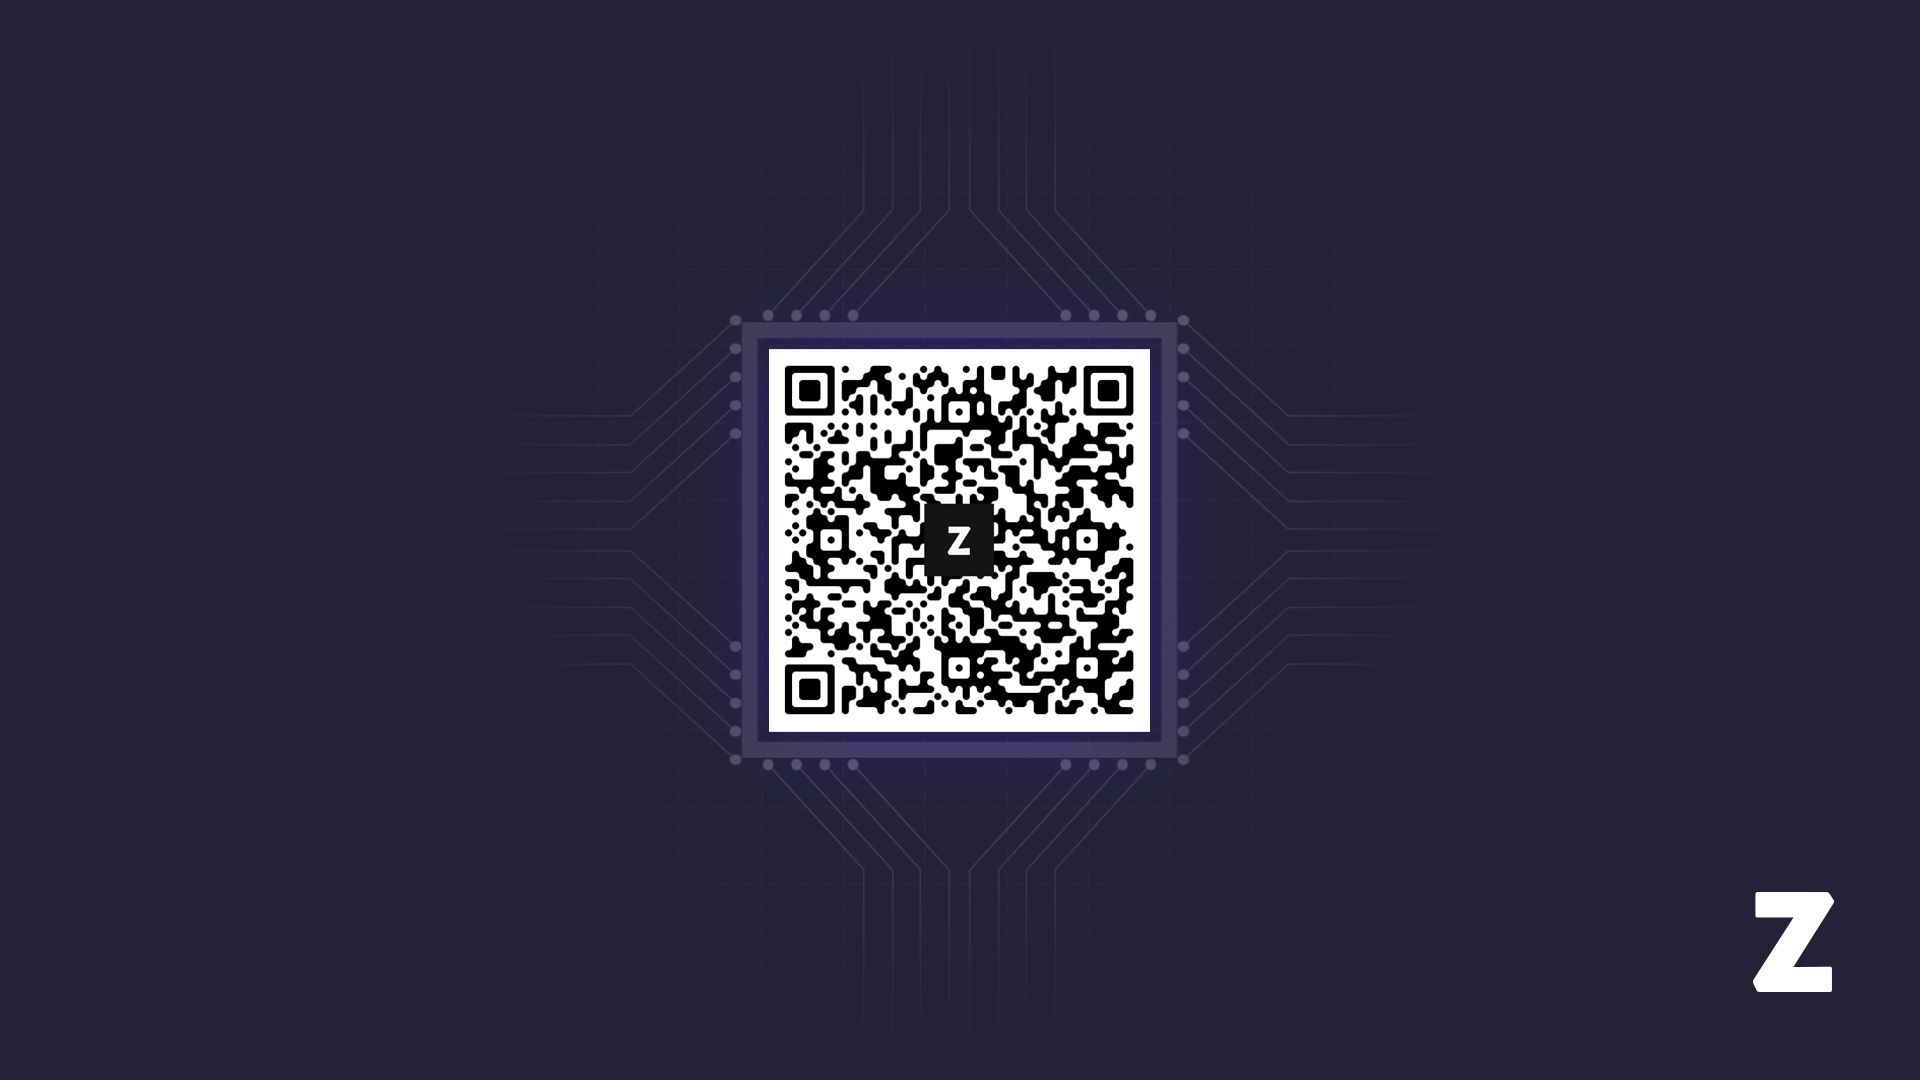 To send Sats, type in the recipient’s Gamertag or simply scan their QR code